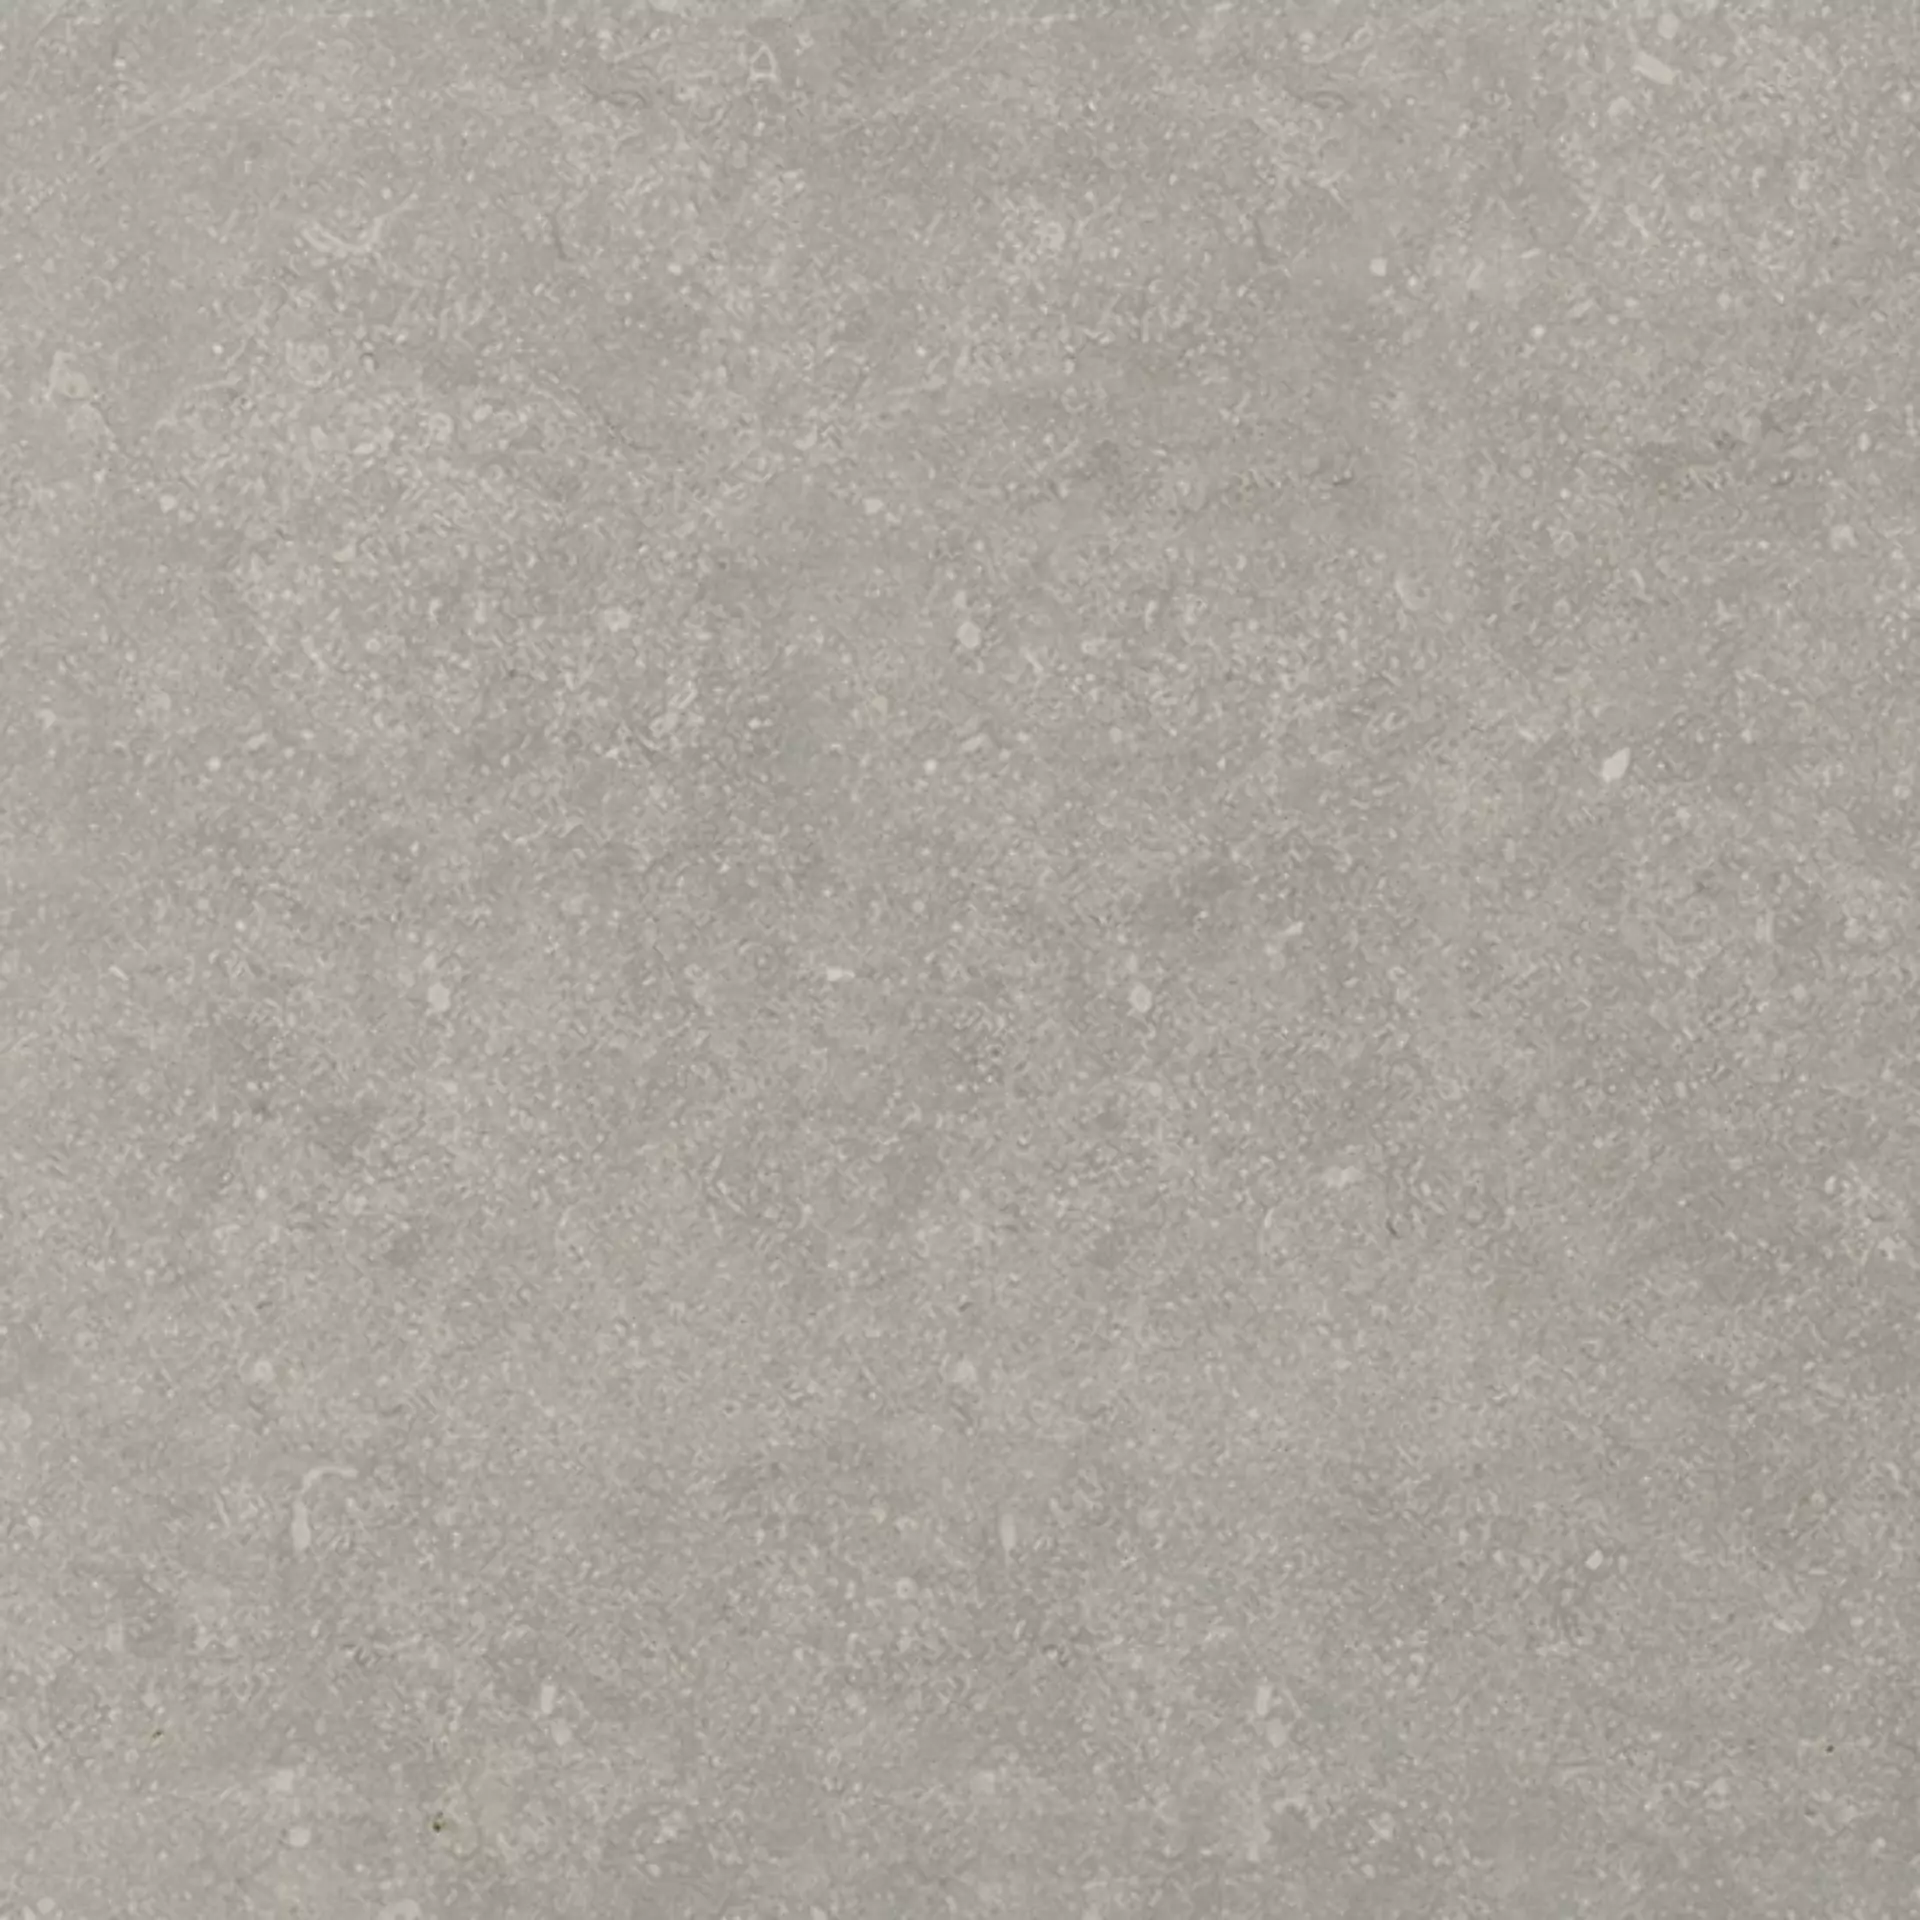 Fioranese Manoir Gris Brion Naturale 0MO693R 60,4x90,6cm rectified 10mm